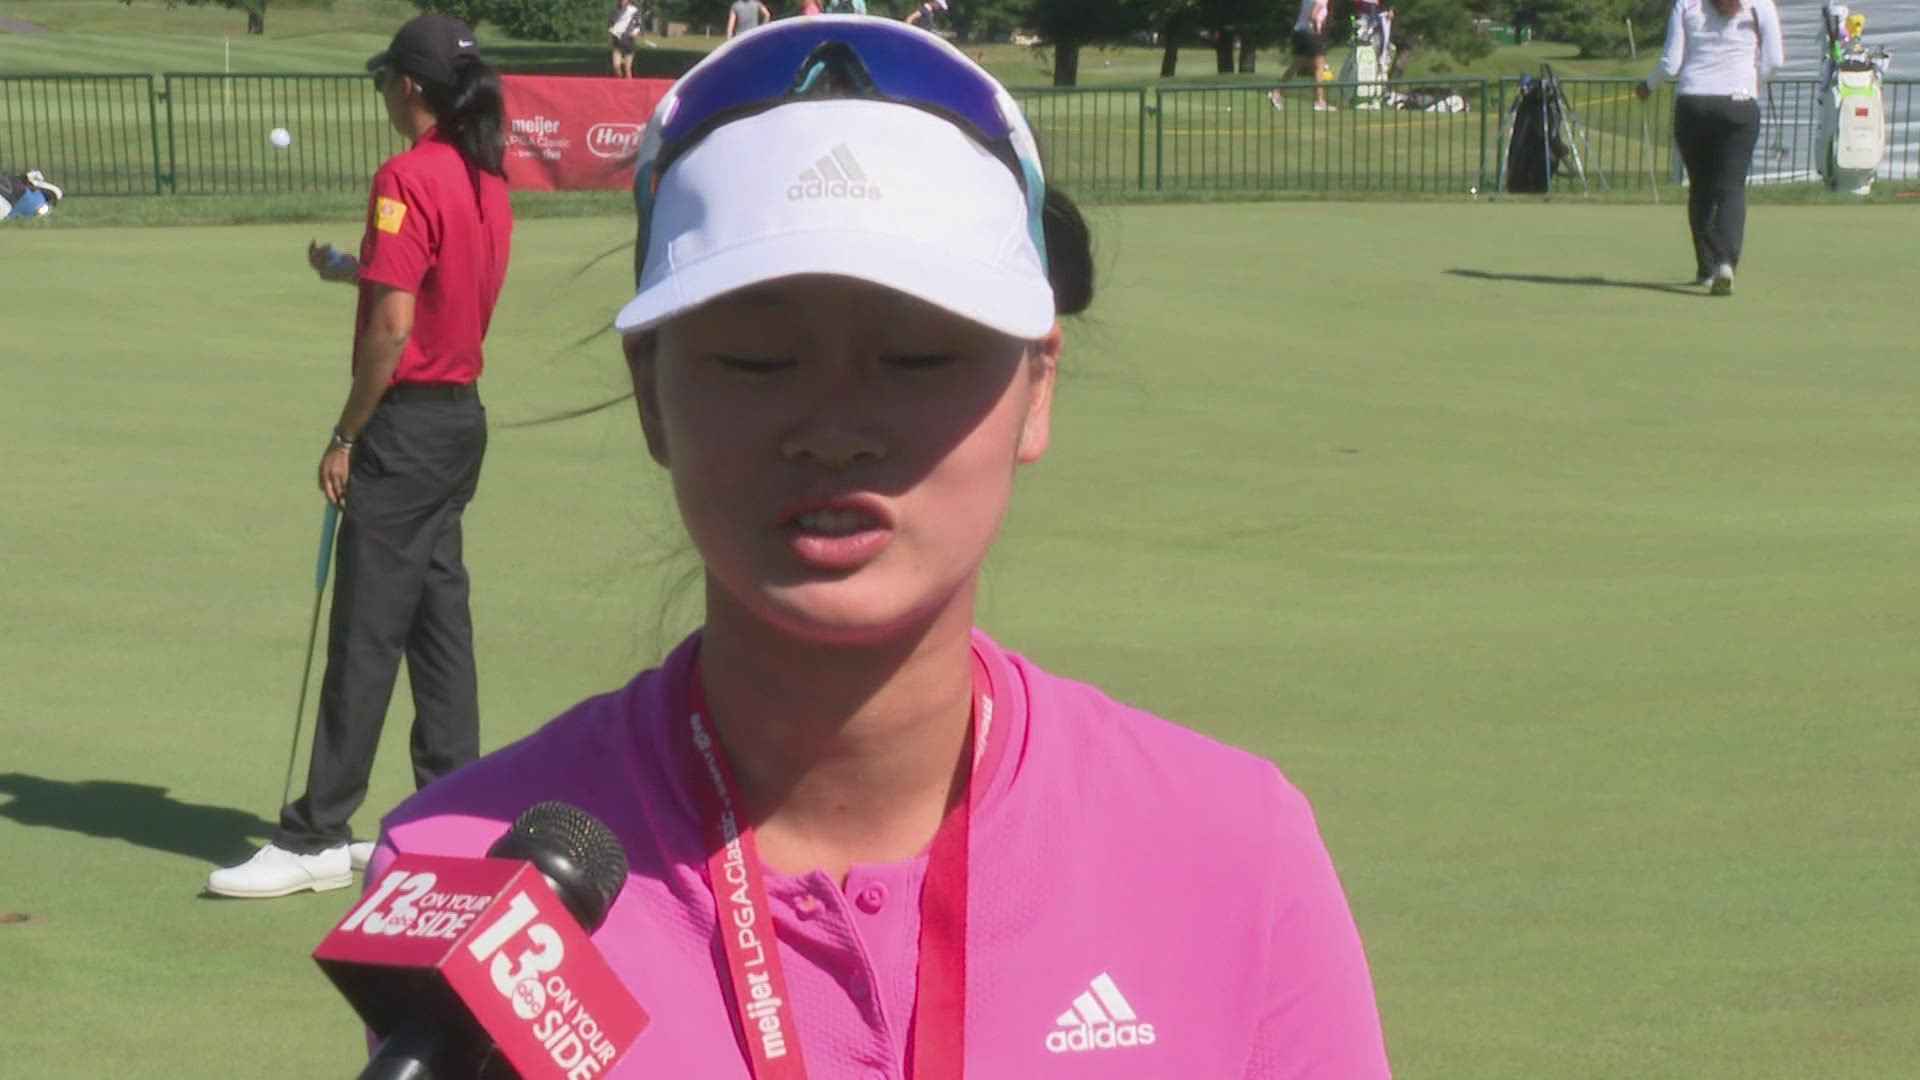 Sophia was able to reach out to a non-profit and play golf with her LPGA idols.